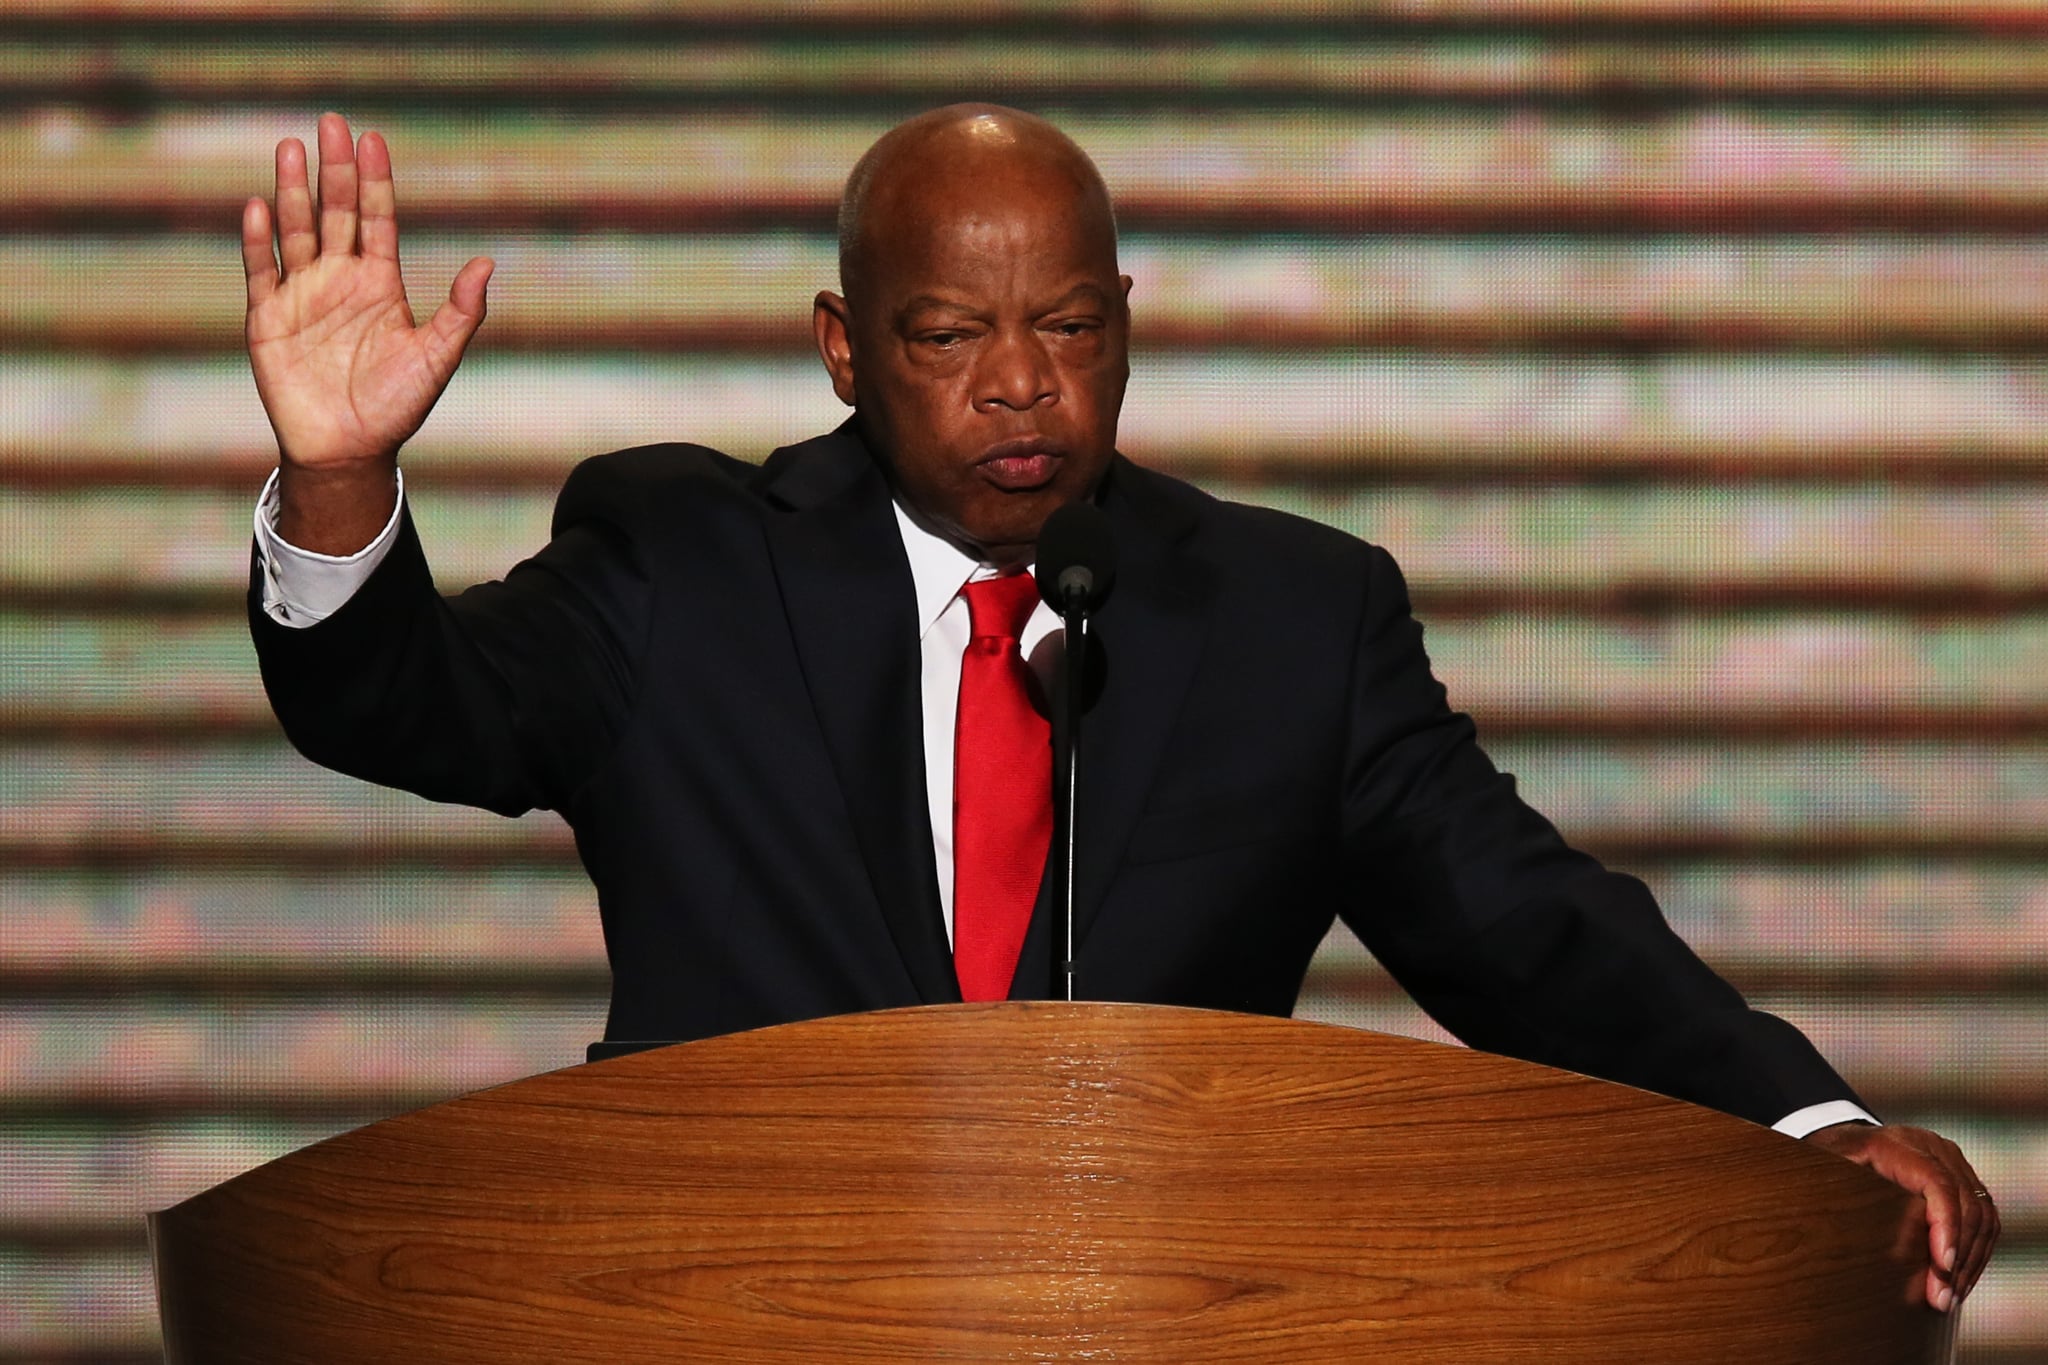 CHARLOTTE, NC - SEPTEMBER 06:  U.S. Rep. John Lewis (D-GA) speaks on stage during the final day of the Democratic National Convention at Time Warner Cable Arena on September 6, 2012 in Charlotte, North Carolina. The DNC, which concludes today, nominated U.S. President Barack Obama as the Democratic presidential candidate.  (Photo by Alex Wong/Getty Images)